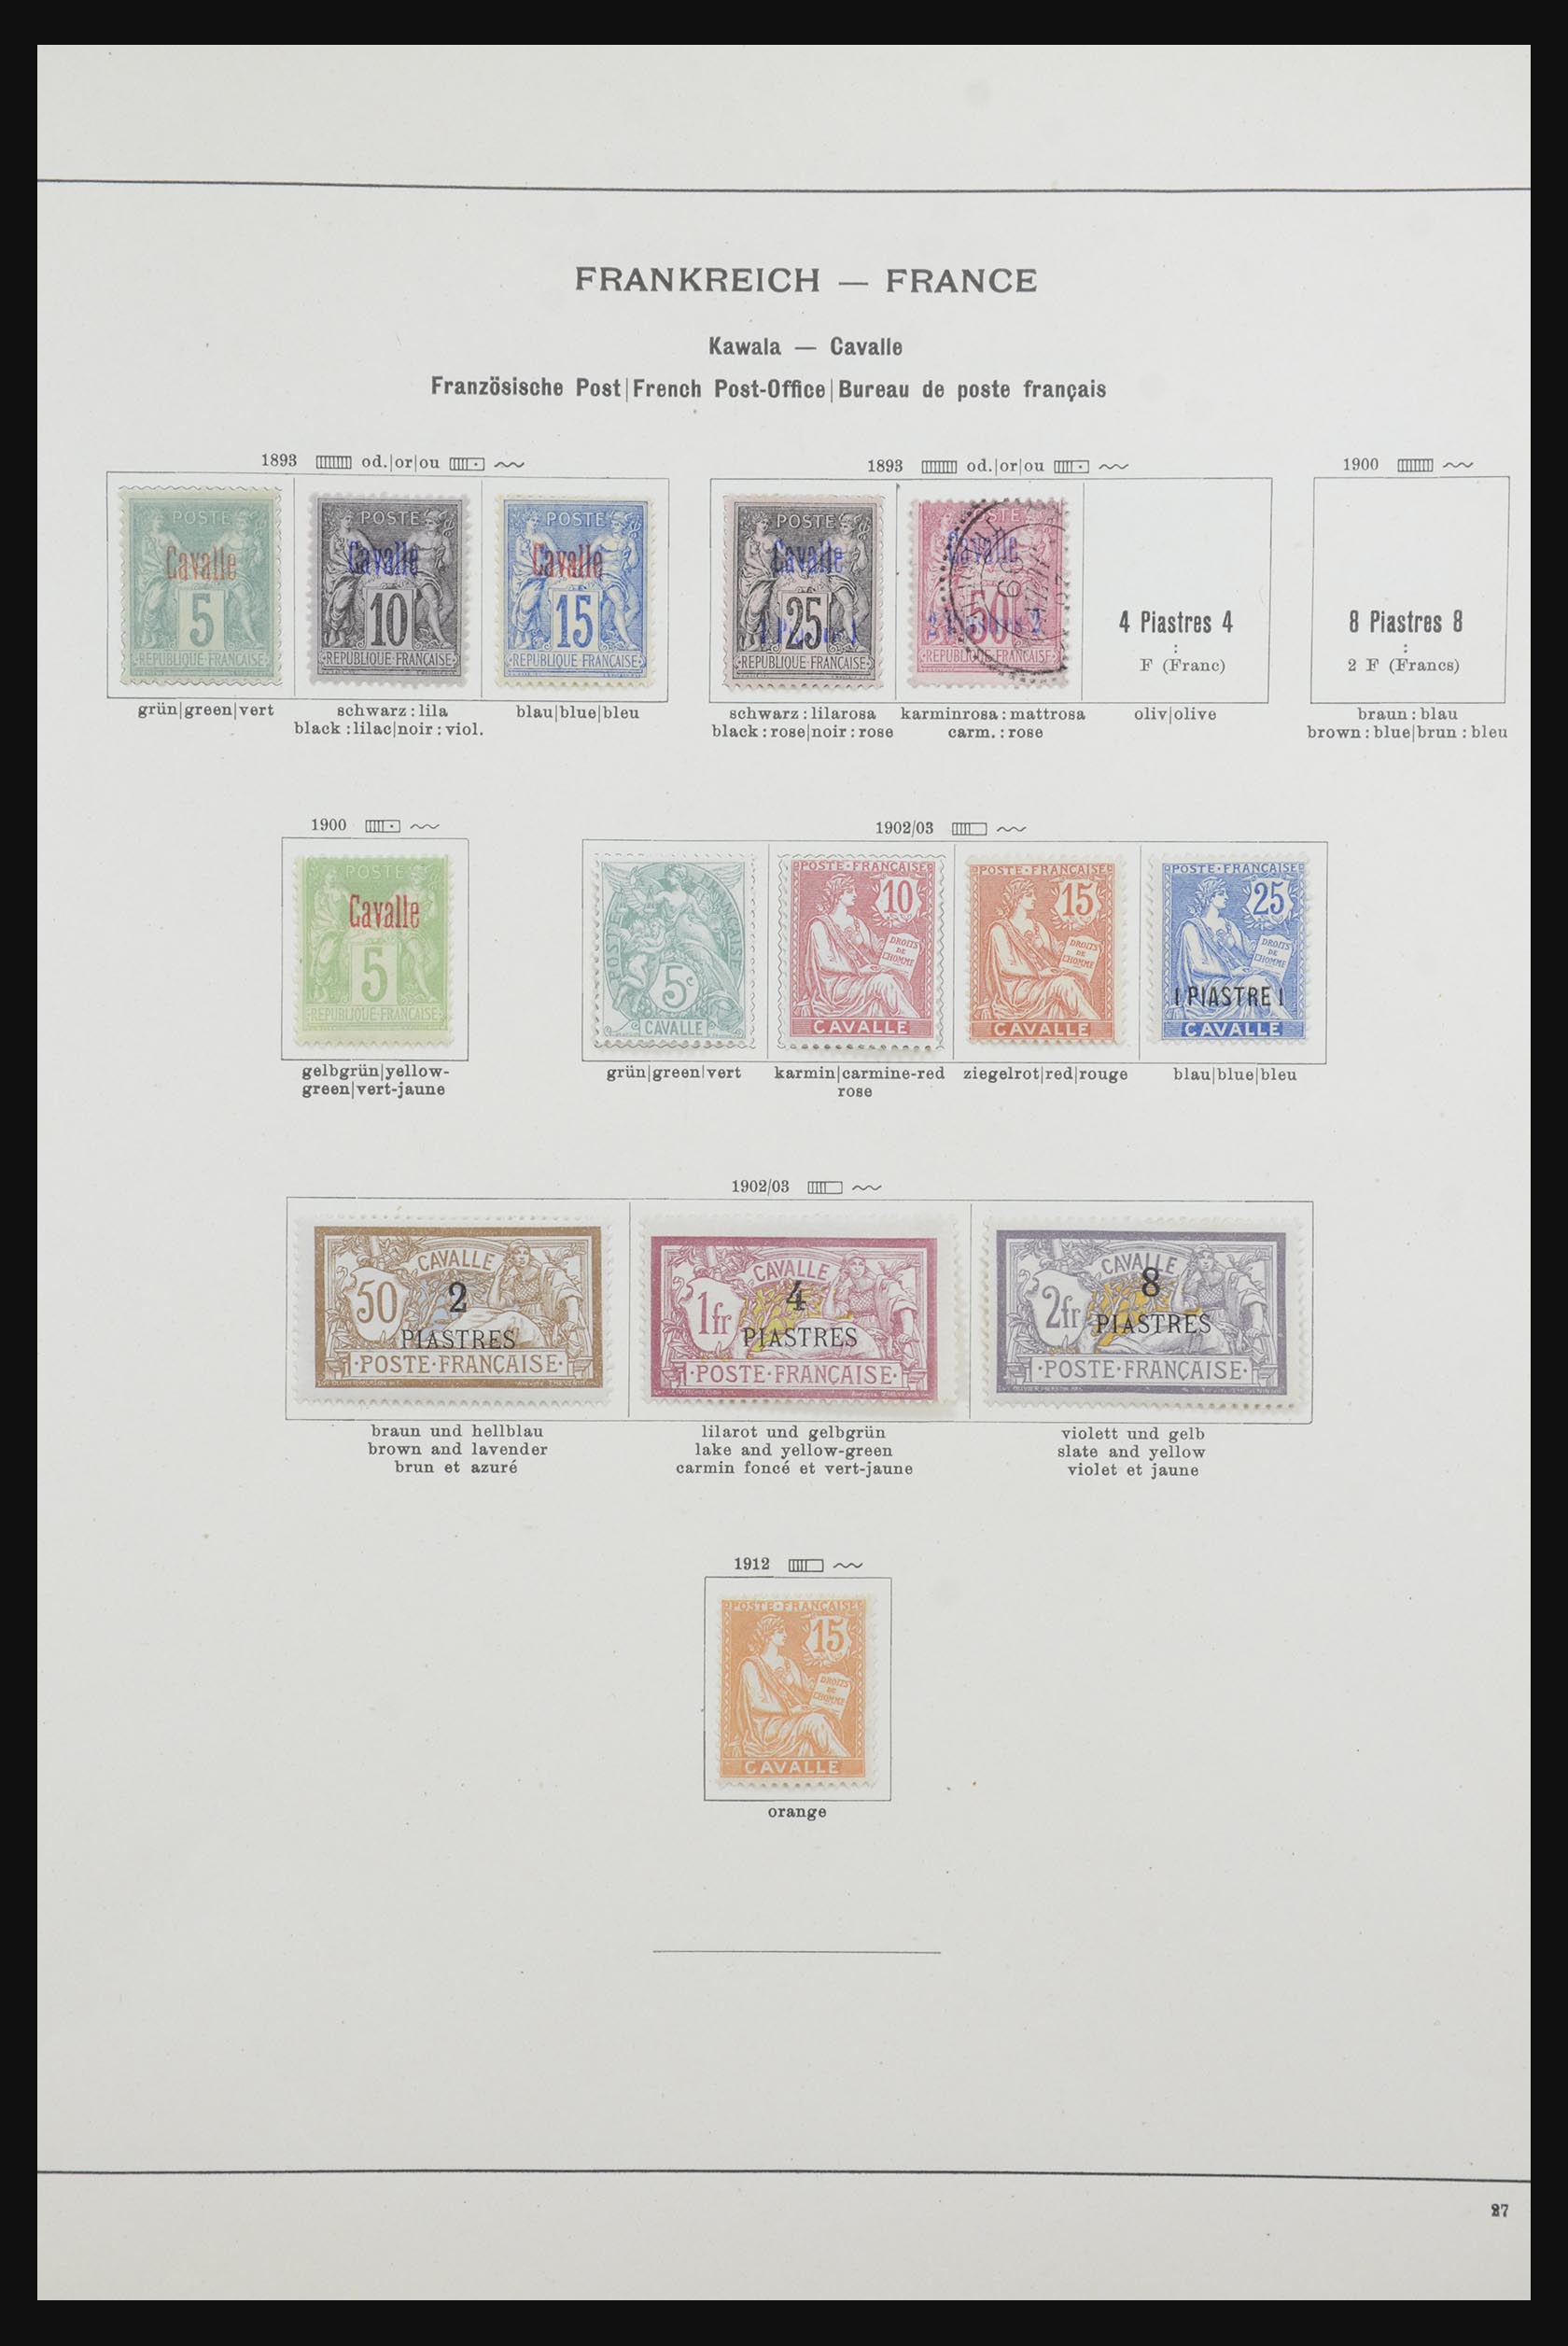 32033 019 - 32033 France and colonies 1849-1932.